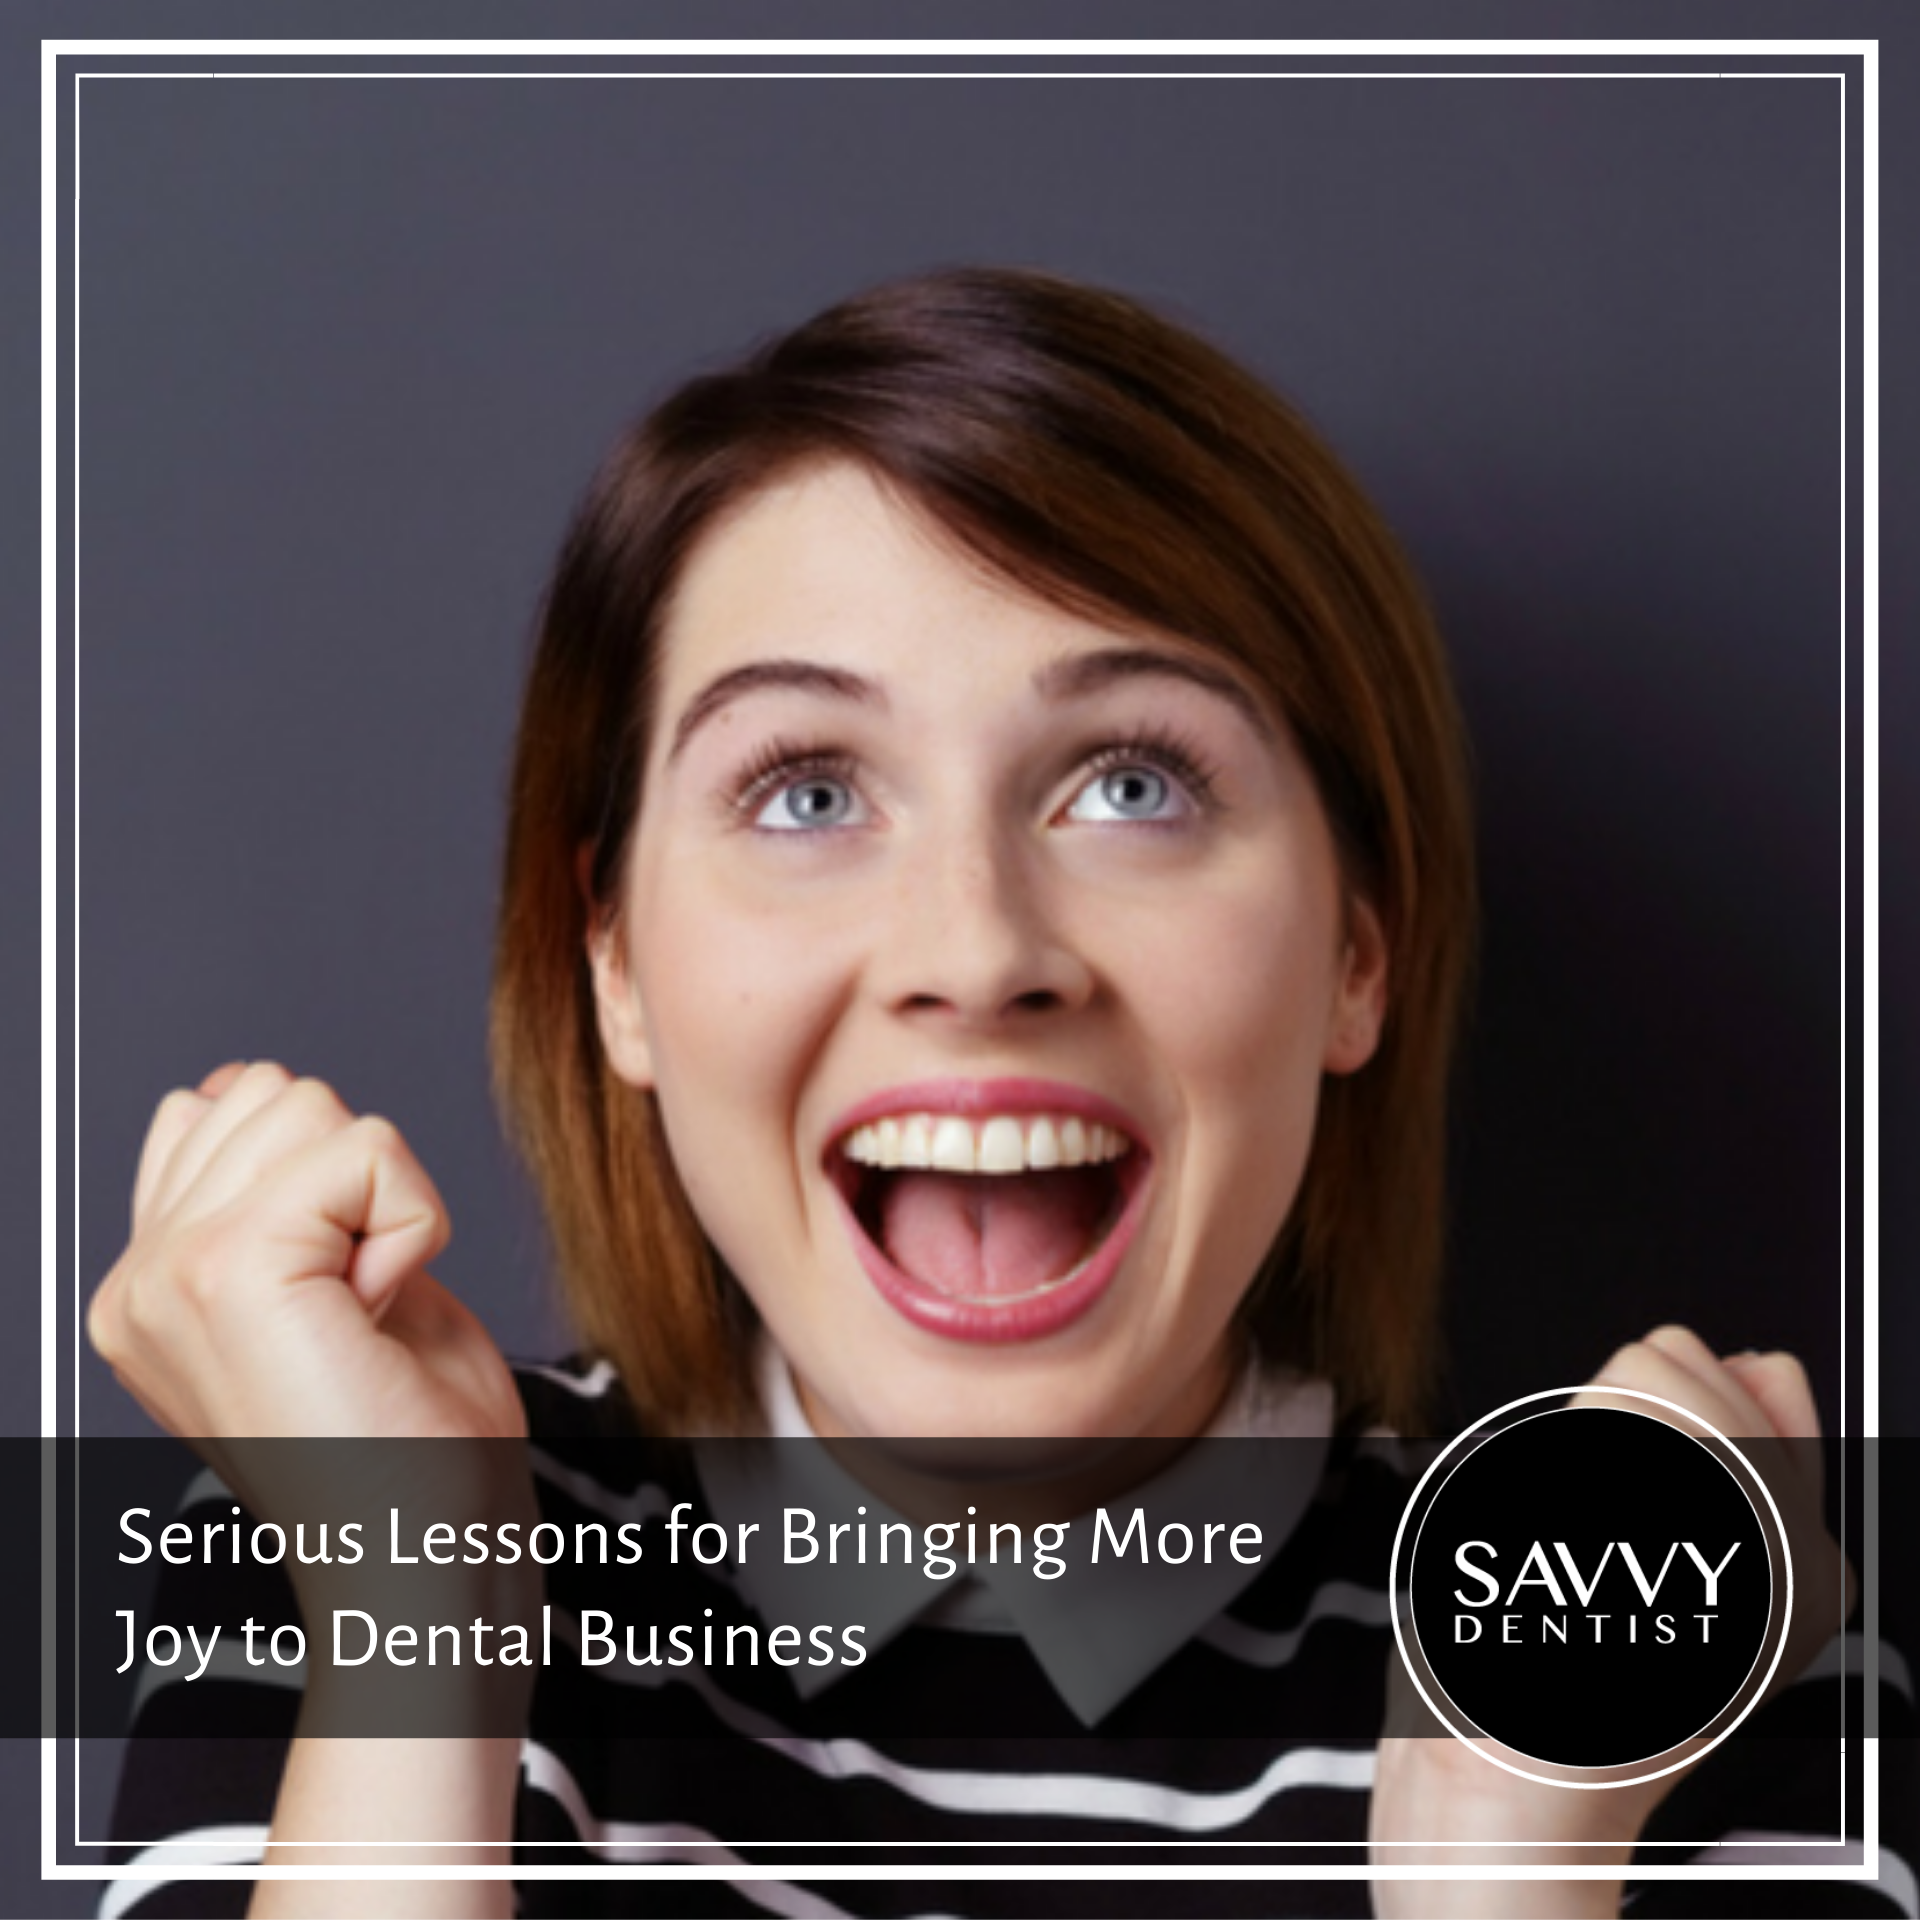 Serious Lessons for Bringing More Joy to Dental Business